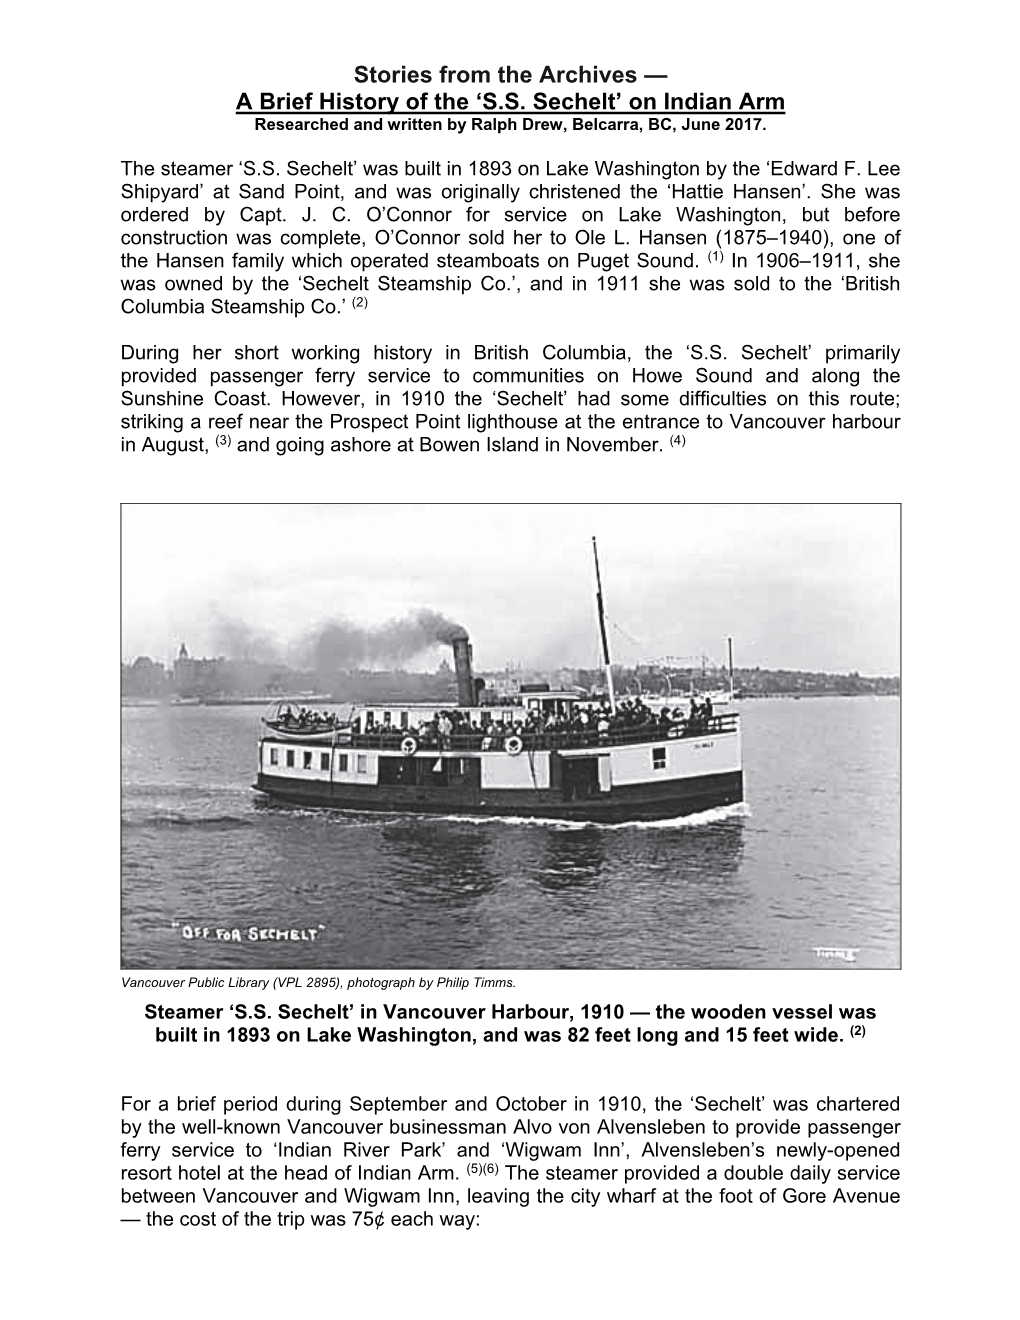 A Brief History of the 'SS Sechelt'